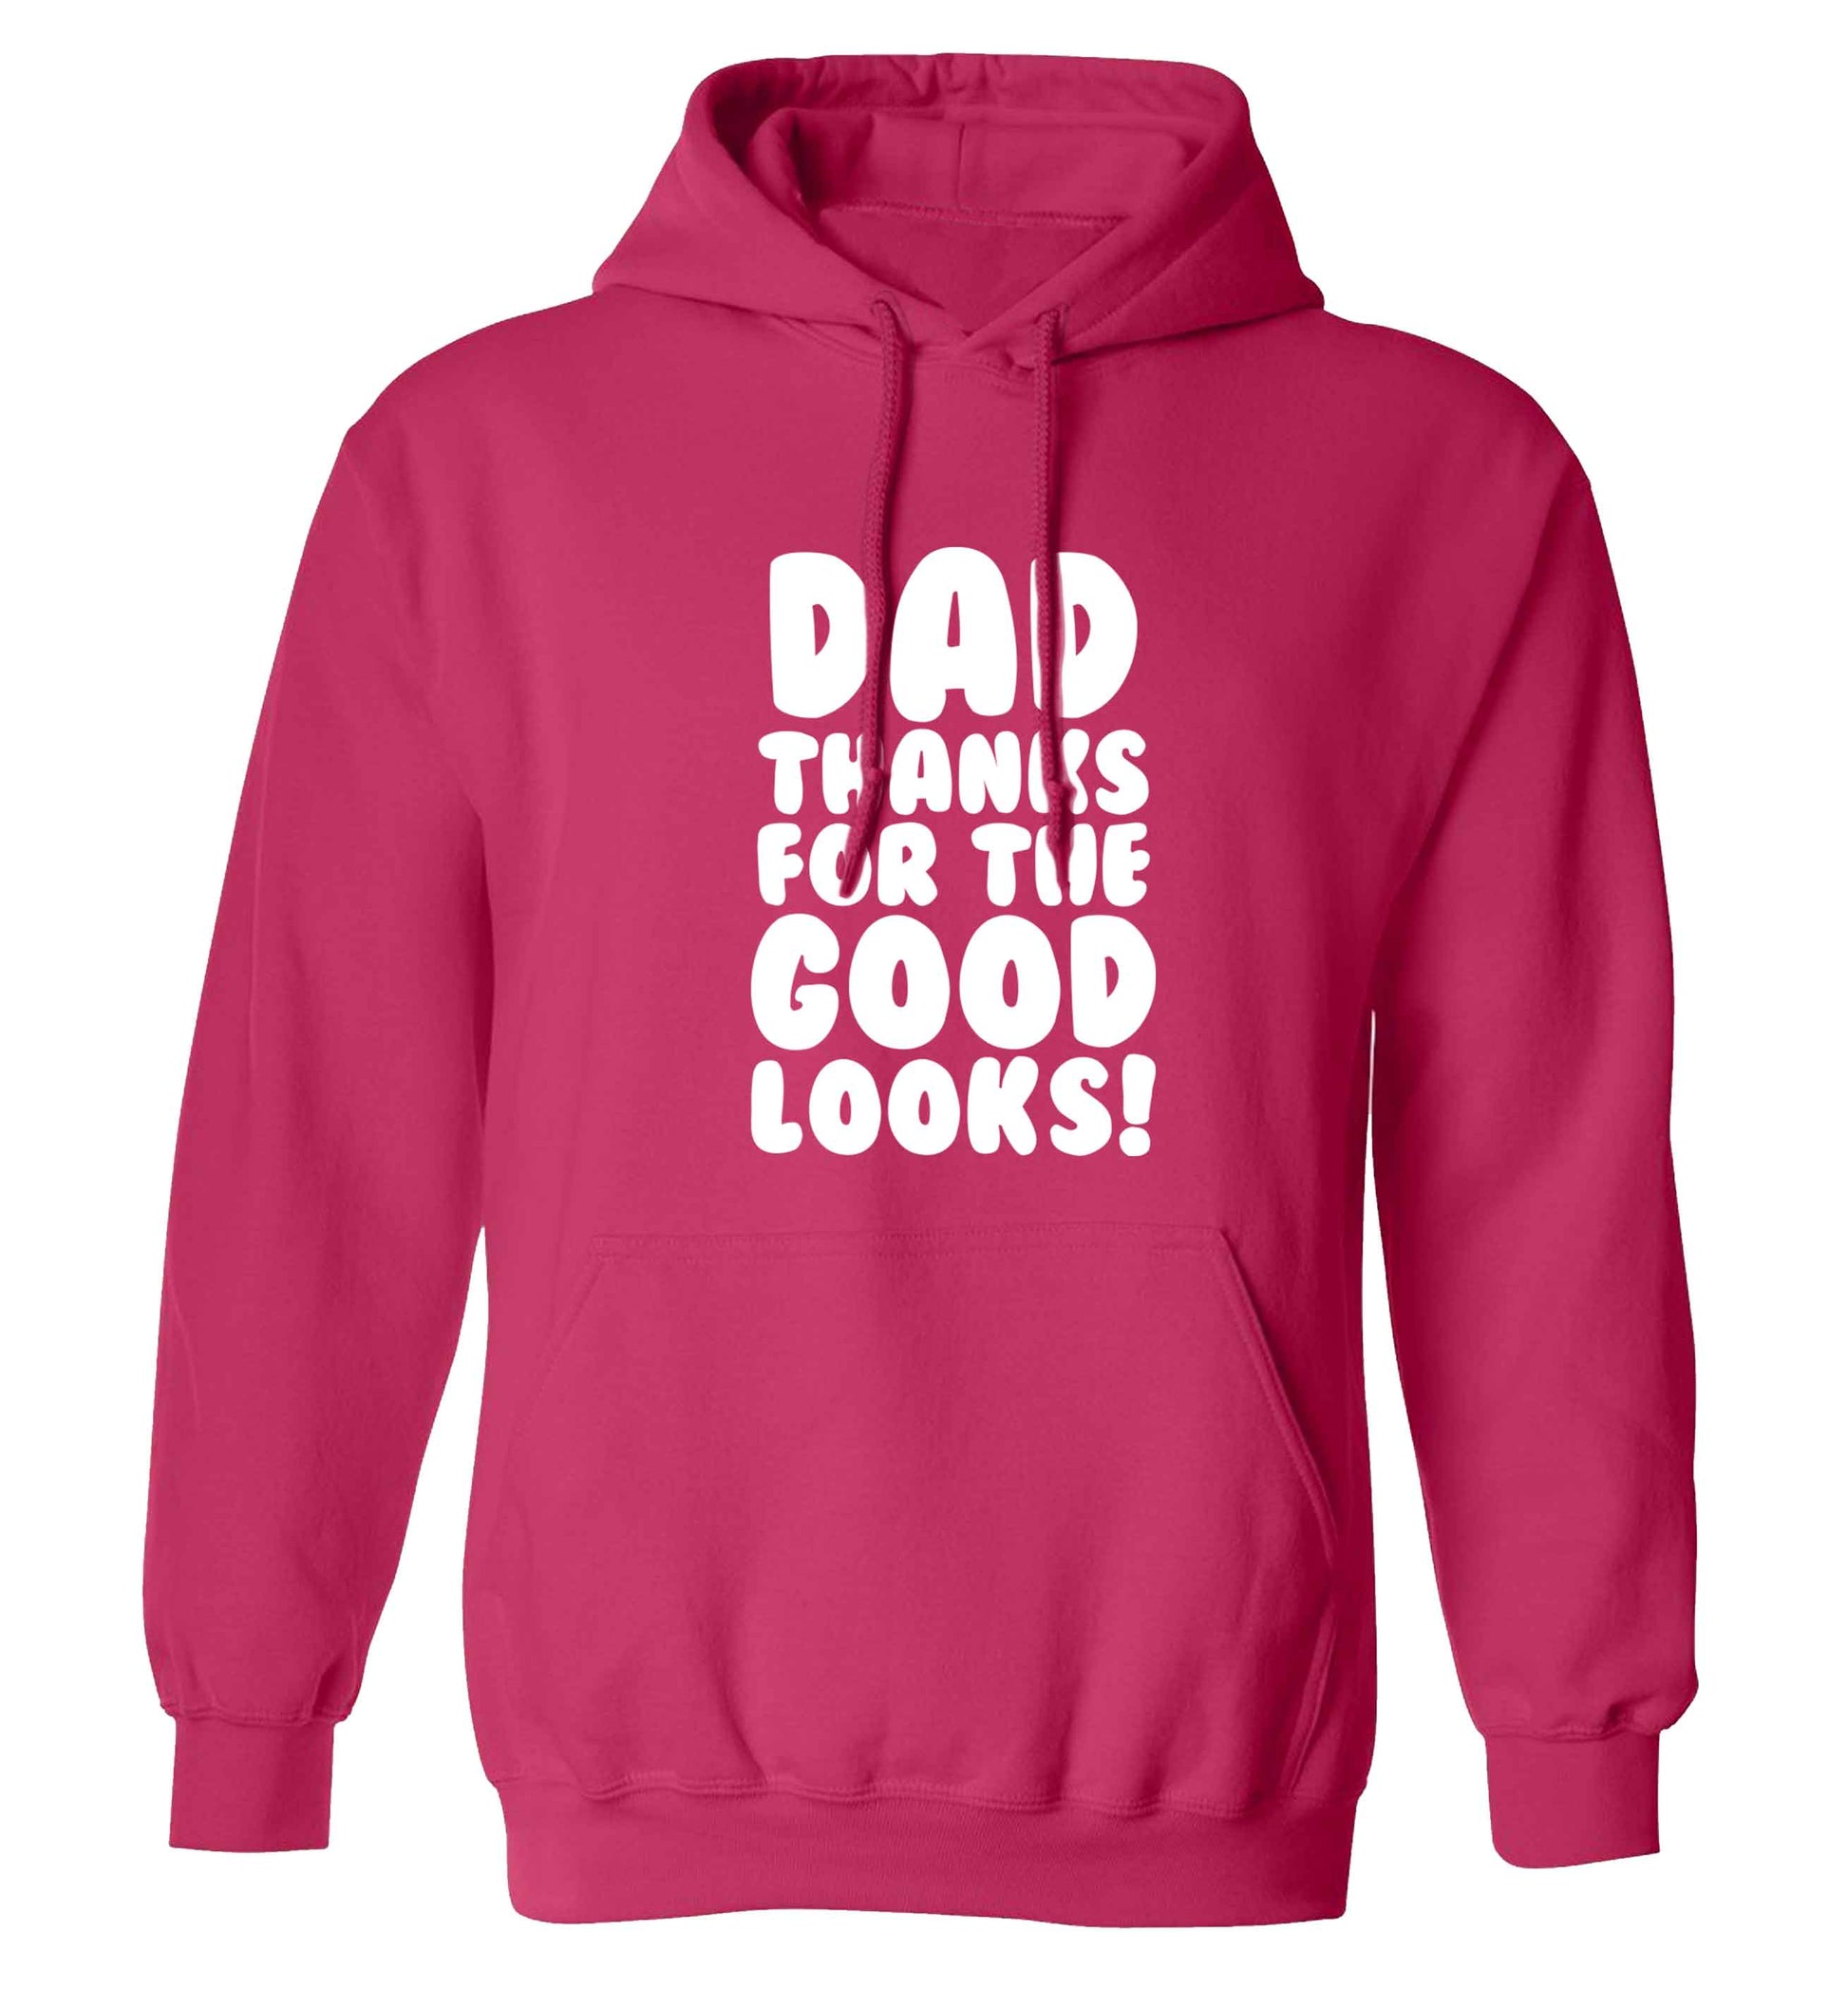 Dad thanks for the good looks adults unisex pink hoodie 2XL